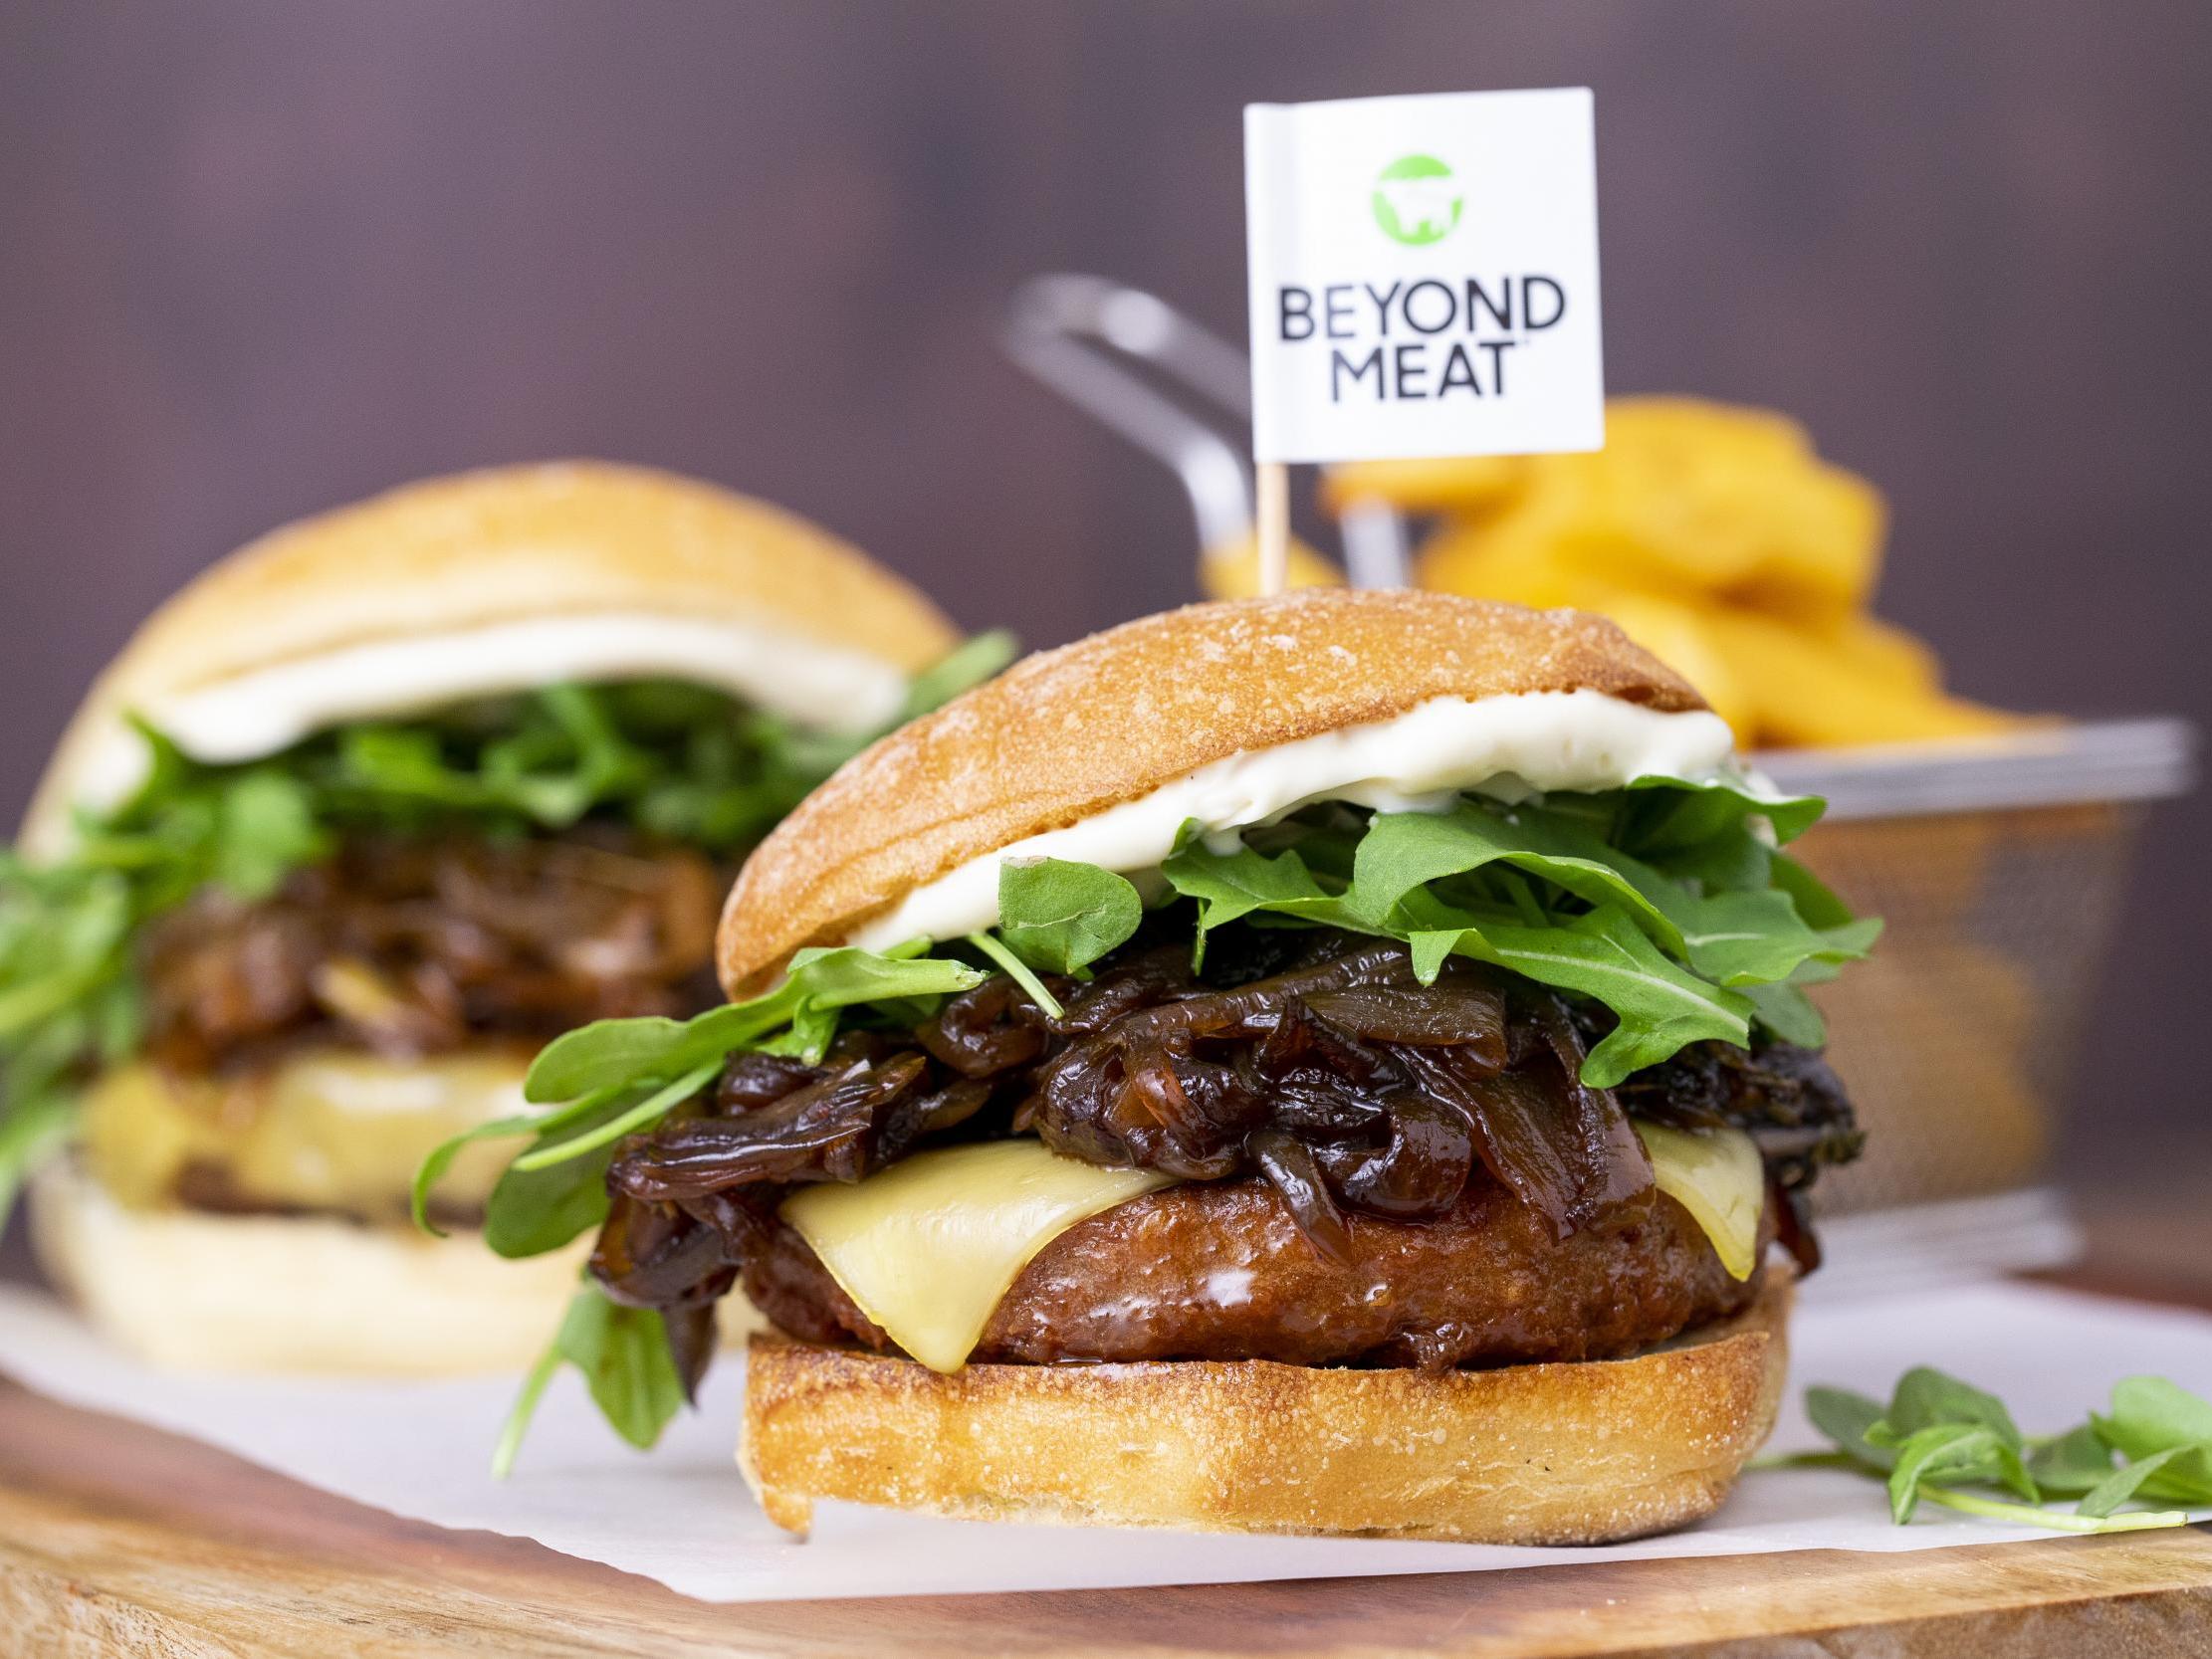 Plant-based meat substitutes were linked with lower heart disease risks in the study funded by Beyond Meat